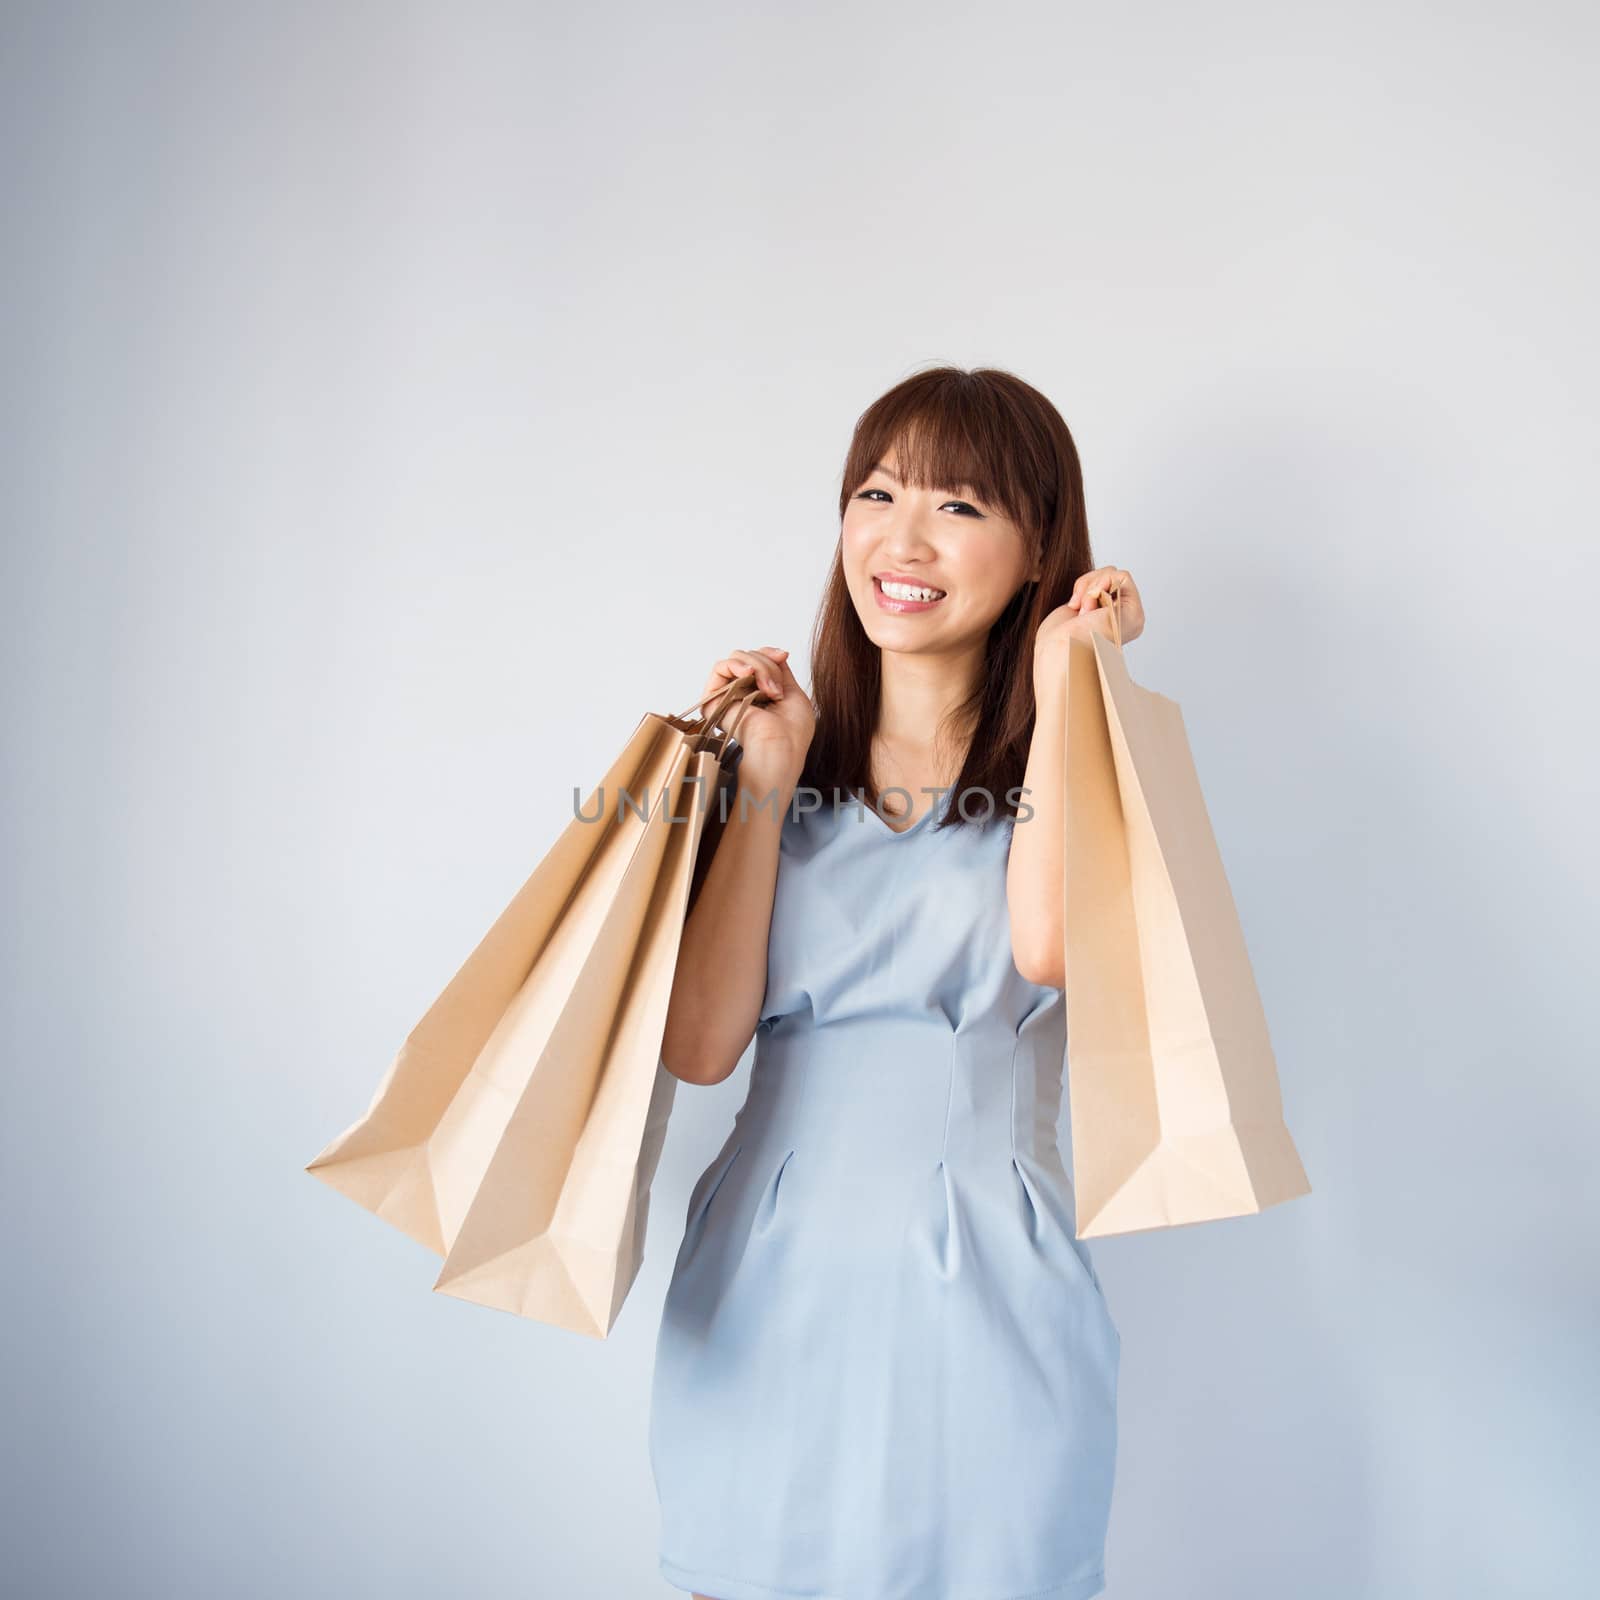 Shopping woman holding shopping bags looking at camera on blue background. Beautiful young Asian shopper smiling happy.